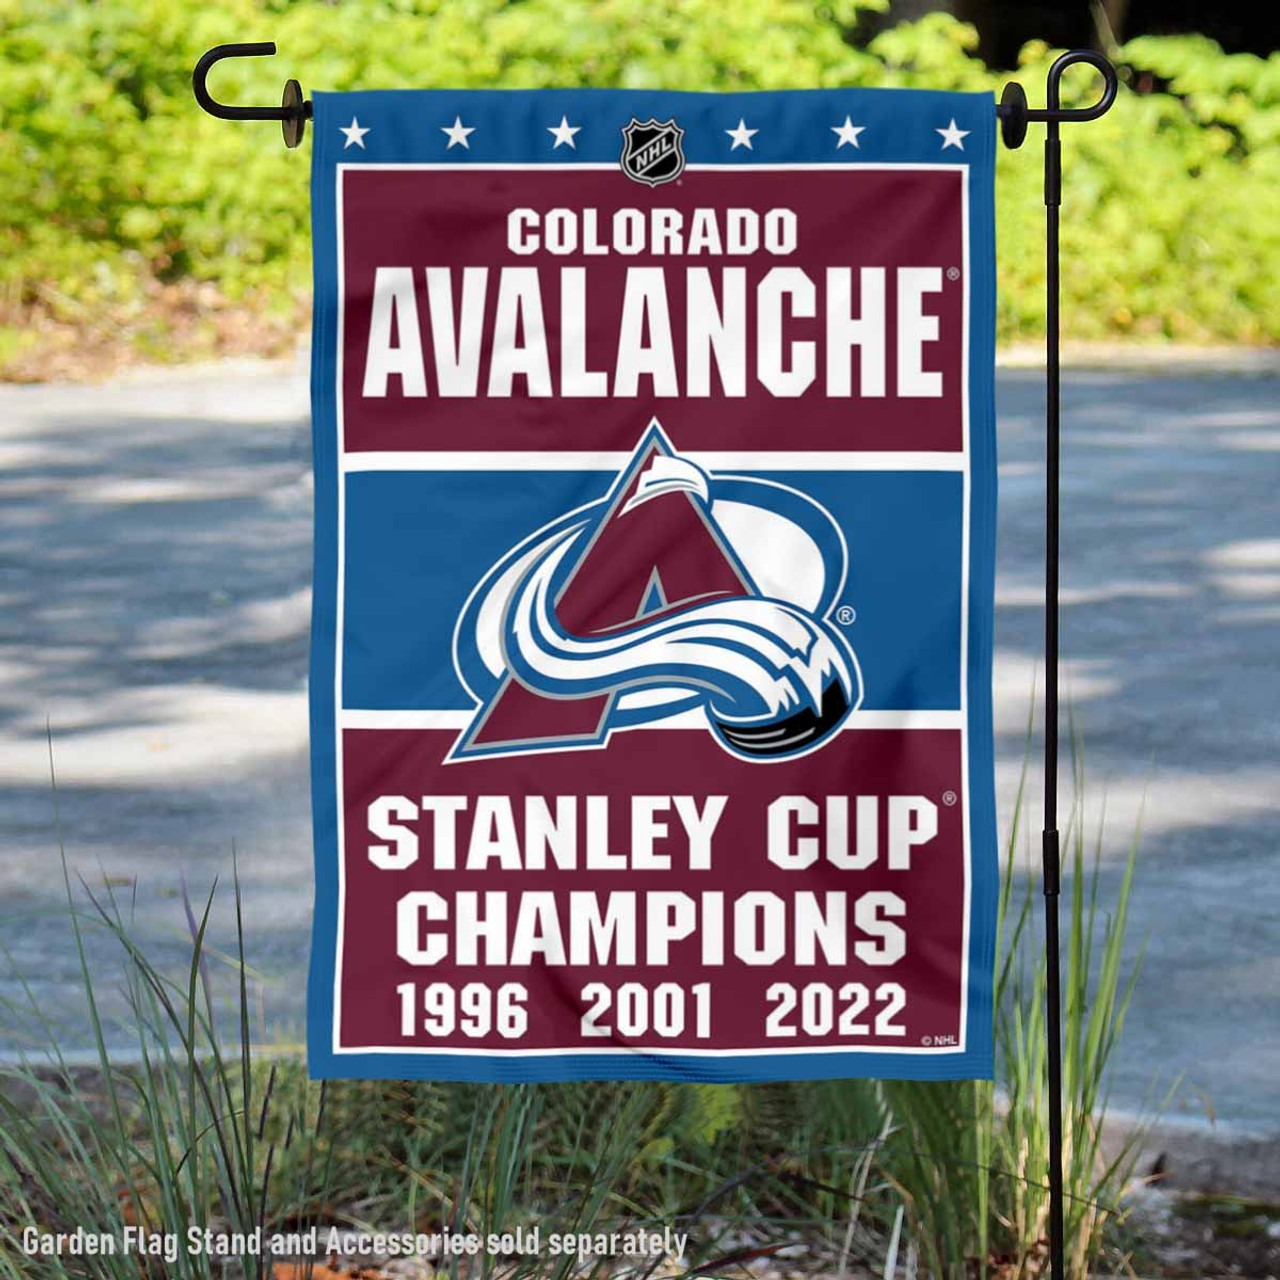 Colorado Avalanche NHL 3x Stanley Cup Champions 1996 2001 2022